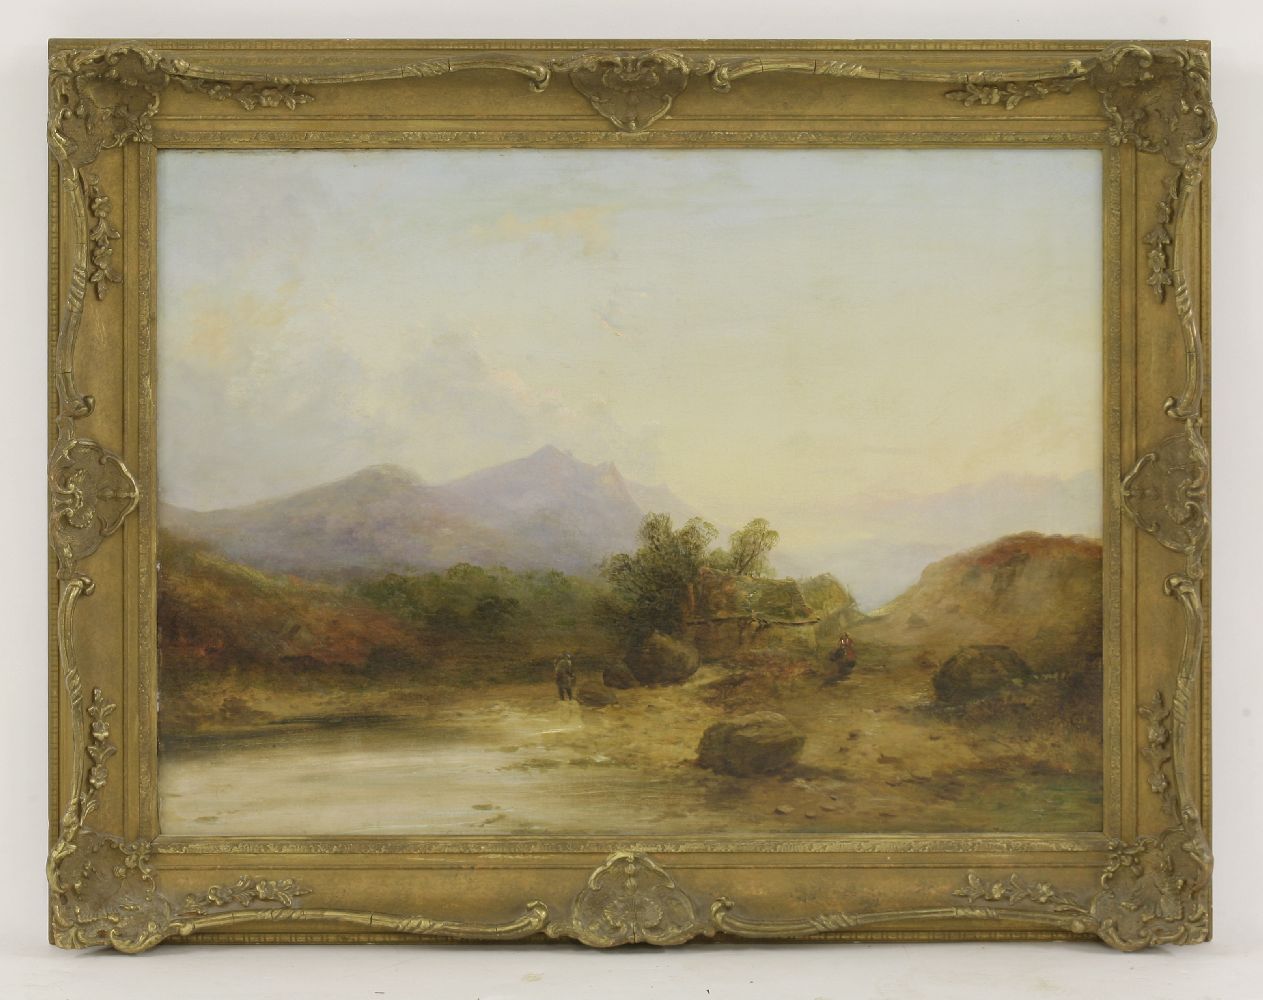 Circle of Joseph Horlor (1809-1887)FIGURES BY A POOL IN A MOUNTAINOUS LANDSCAPEOil on canvas56 x - Image 2 of 3